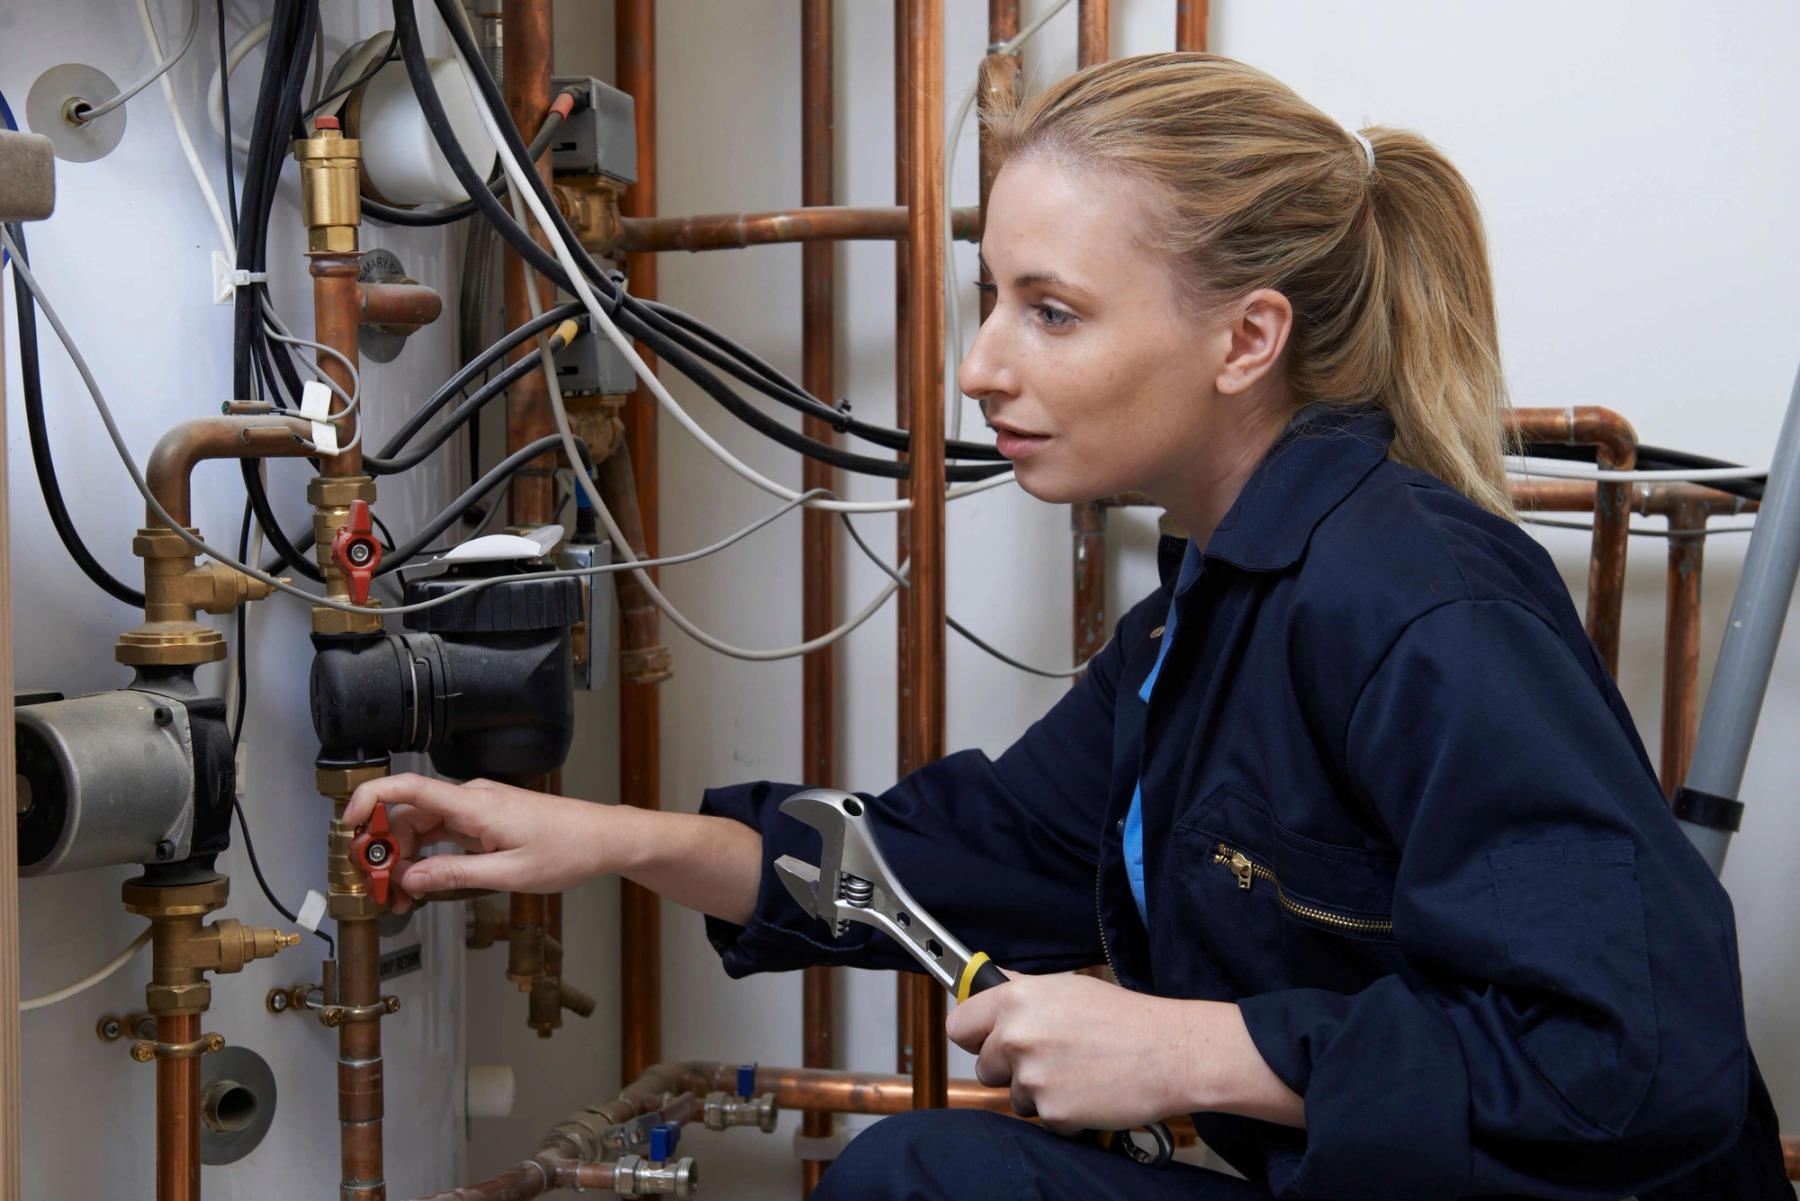 A woman with blonde hair is holding a wrench and working on plumbing pipes.